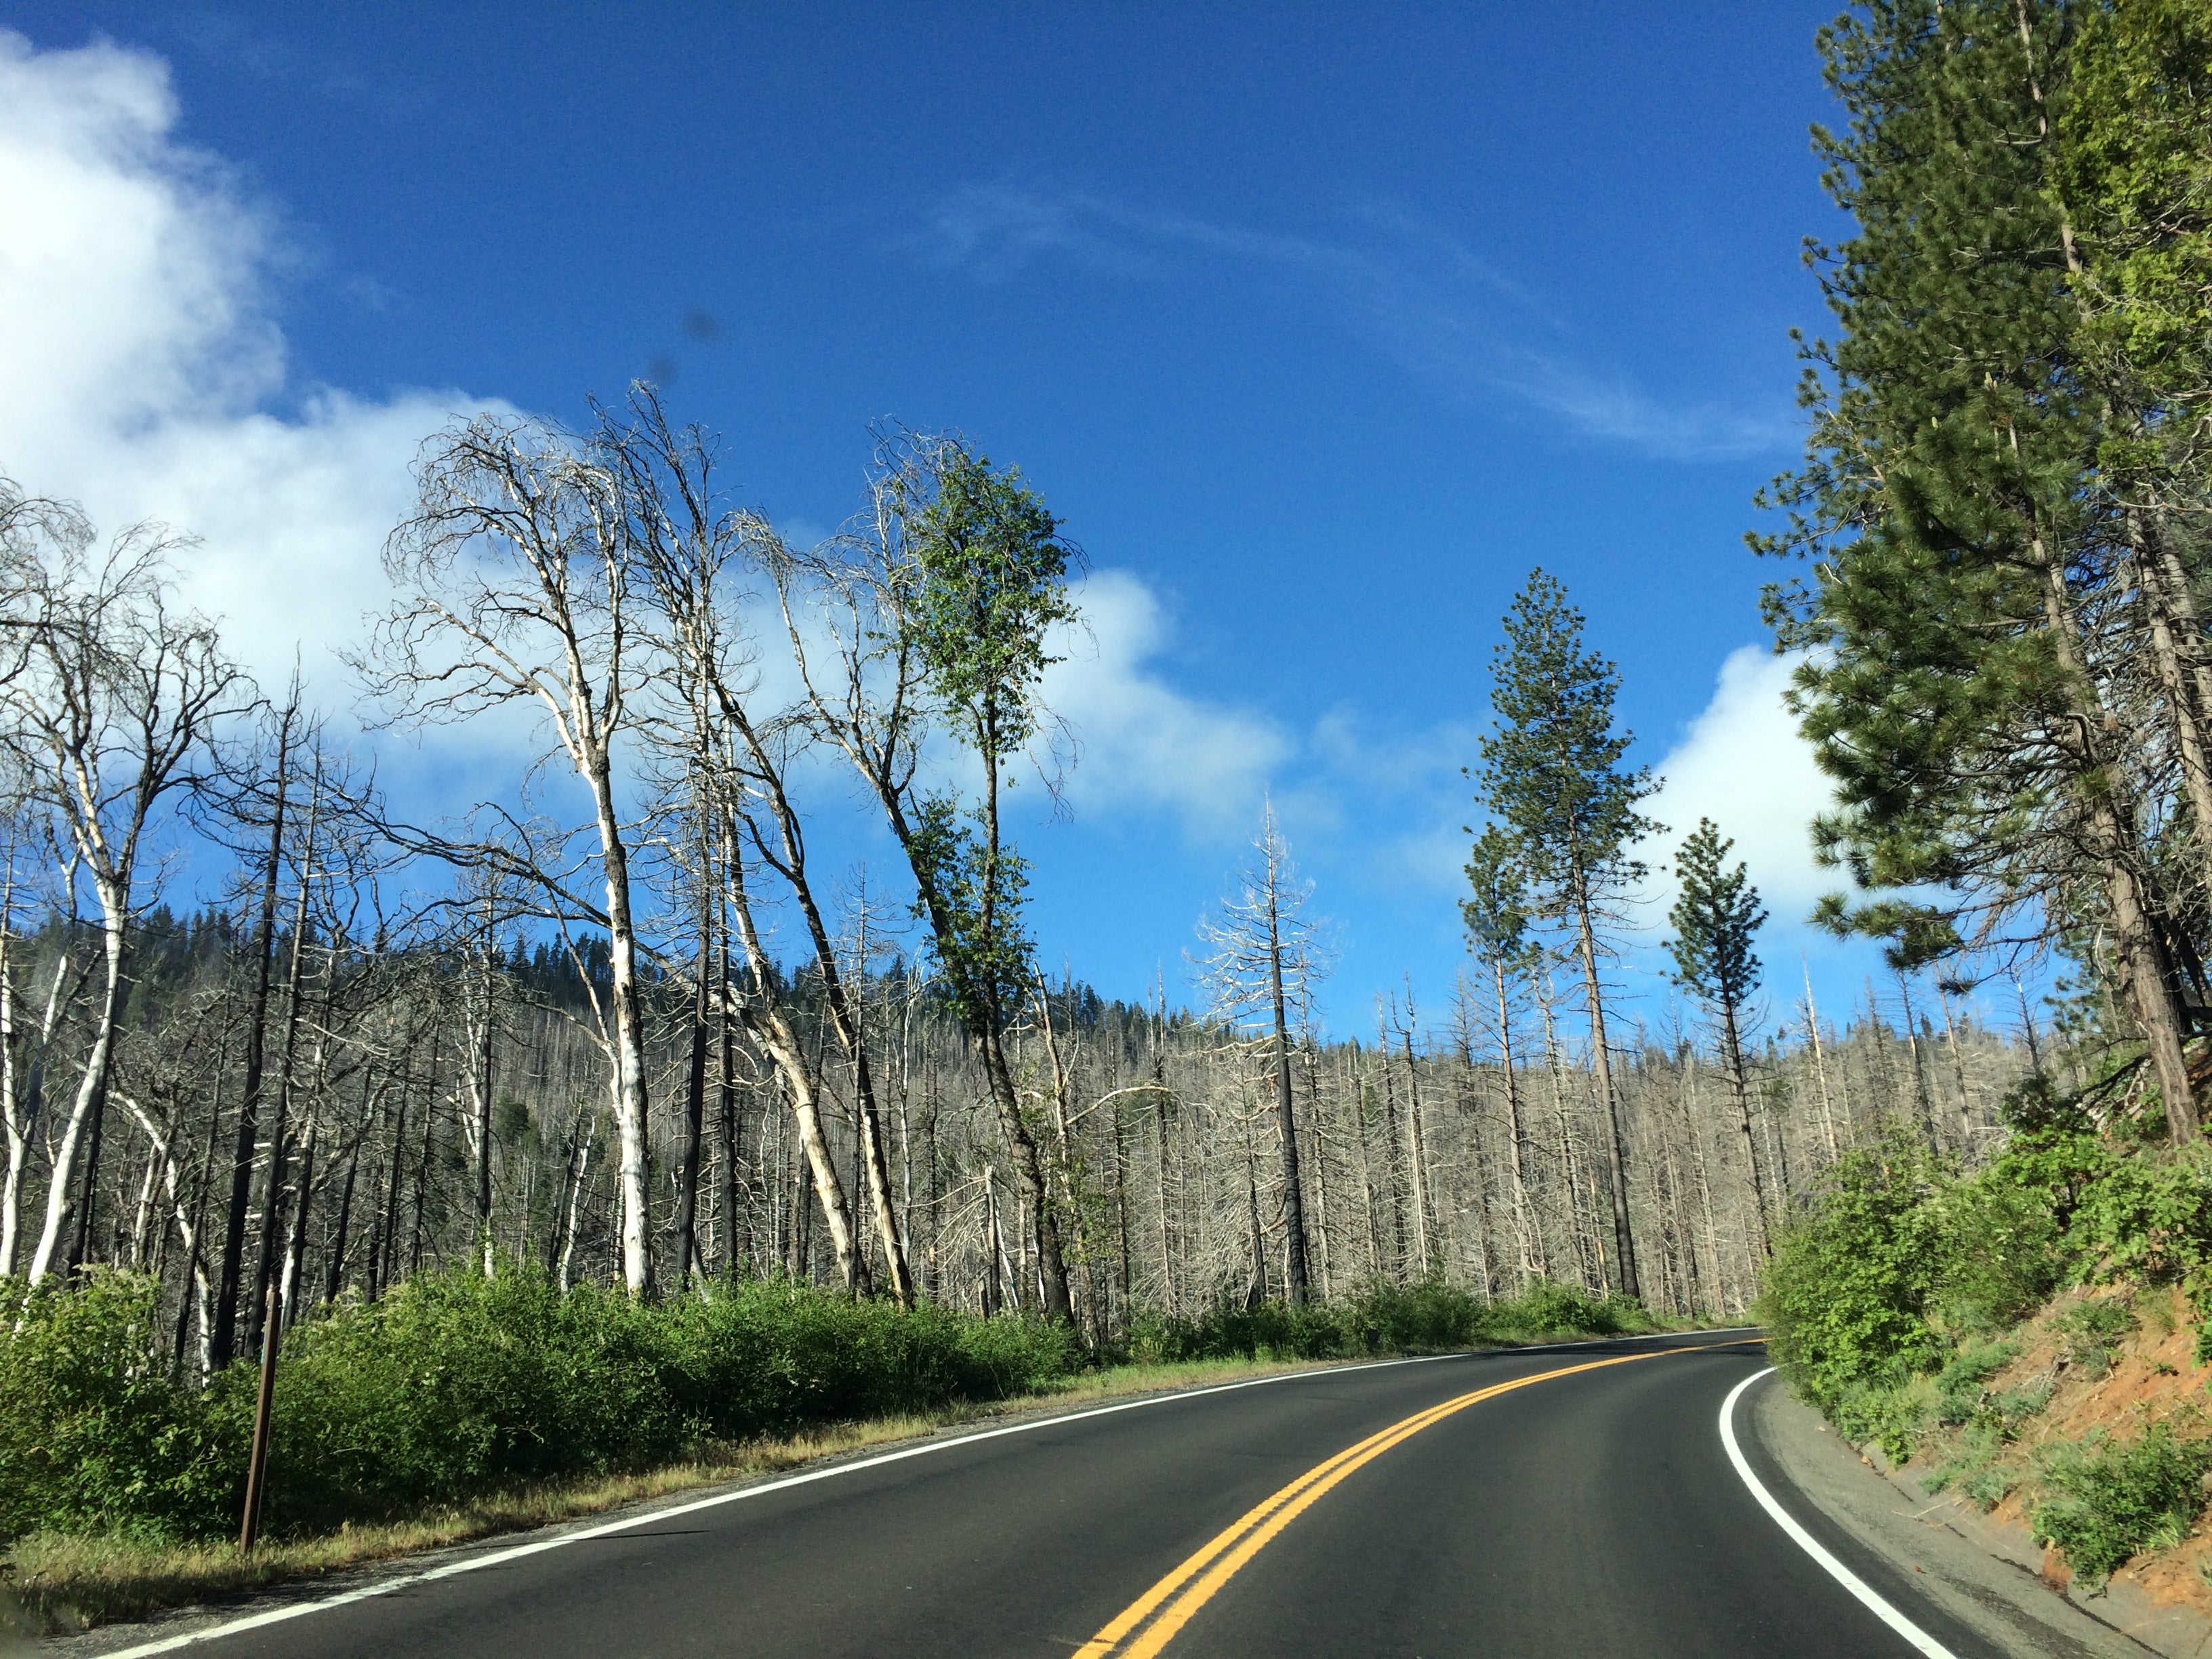 The Rim Fire did devastate this part of the park in 2013-2014, but you can't tell once you are in the campground. This is up the road from the campground, between the campground and Yosemite Valley.  (But closer to the campground than the valley.)